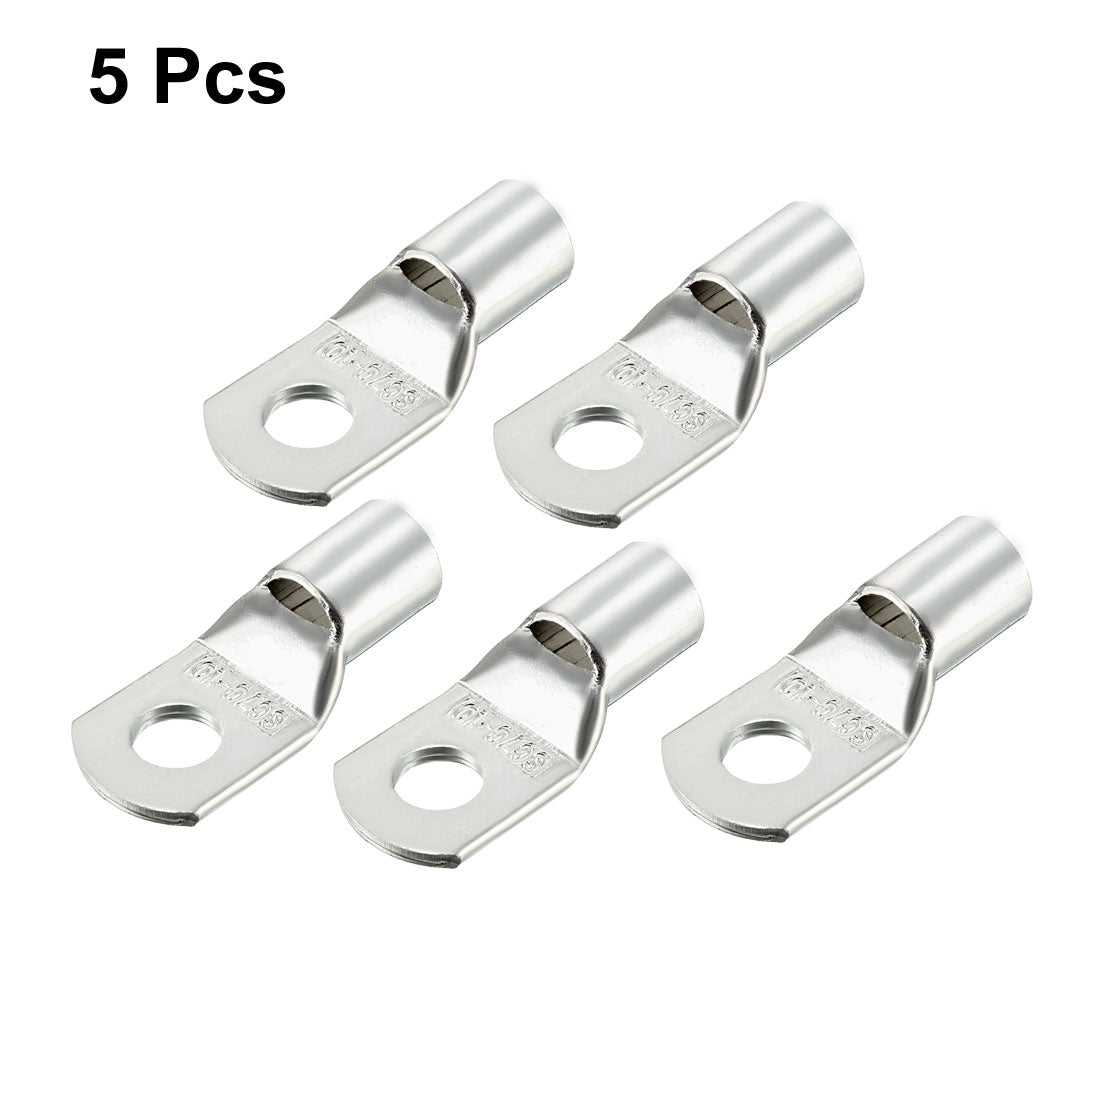 uxcell Uxcell 5Pcs SC70-10 Non-Insulated U-Type Copper Crimp Terminals 50mm Wire Connector Silver Tone